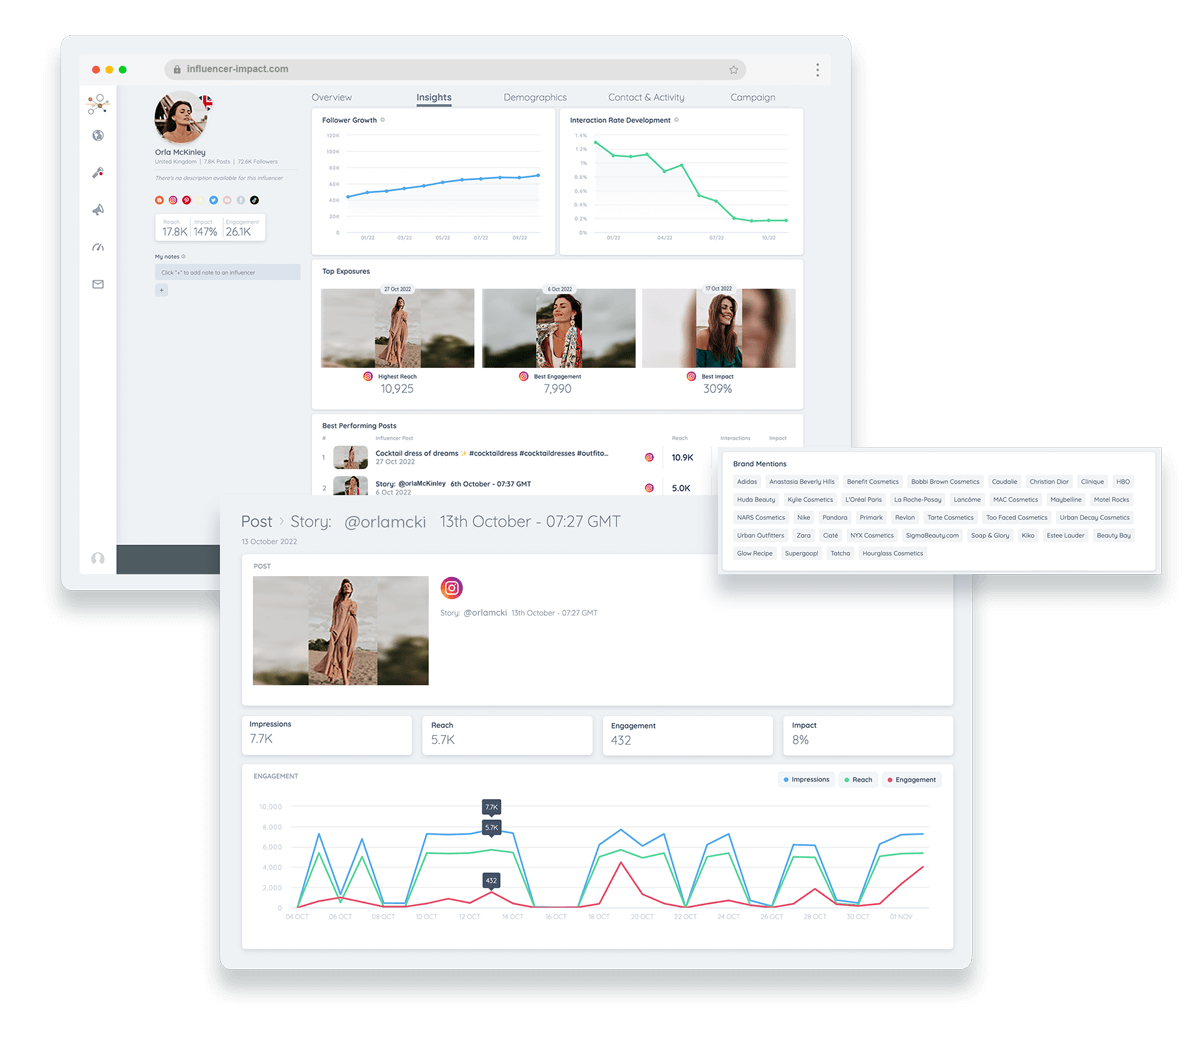 Influencer marketing tool showing influencer insights